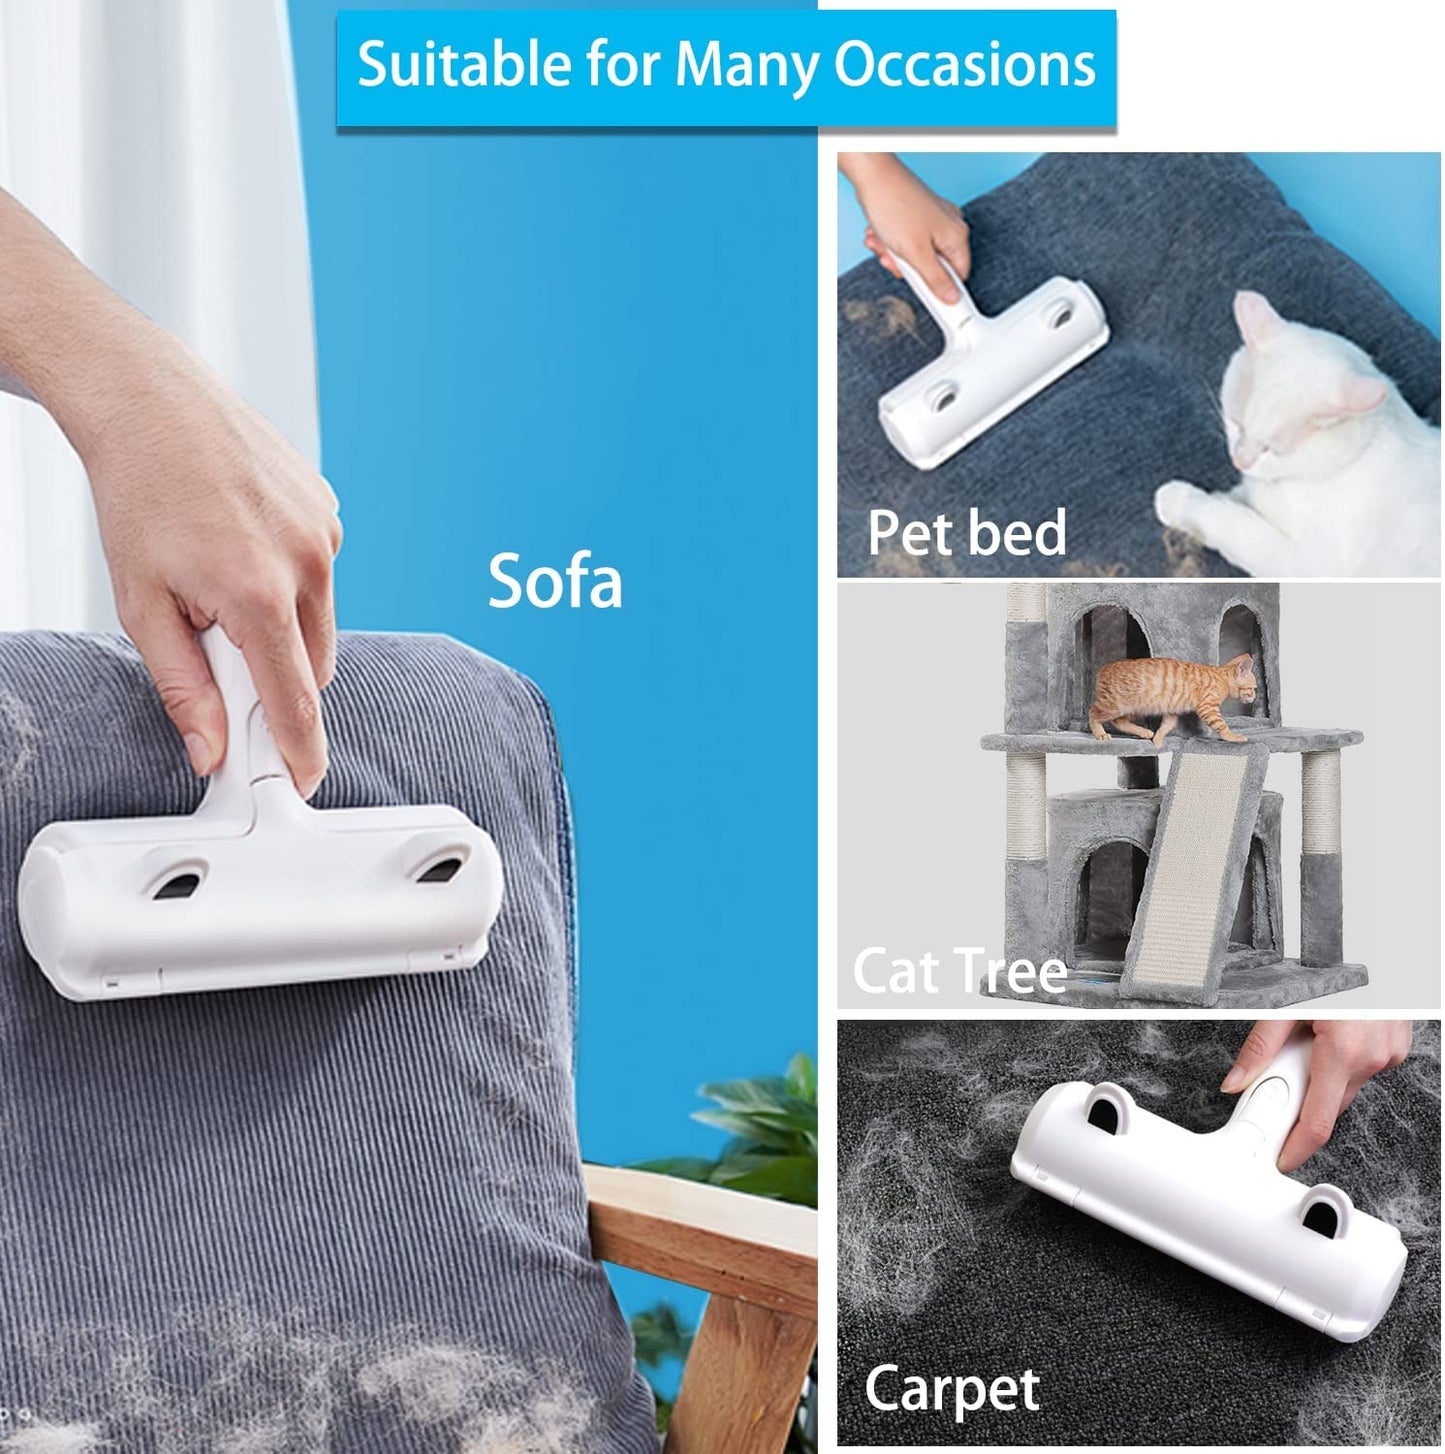 Pet Hair Remover Roller, Reusable Animal Hair Removal Brush for Dogs and Cats, Easy to Clean Fixed Areas Pet Fur from Carpet, Furniture, Rugs, Stairs, bedding and Sofa Wintory